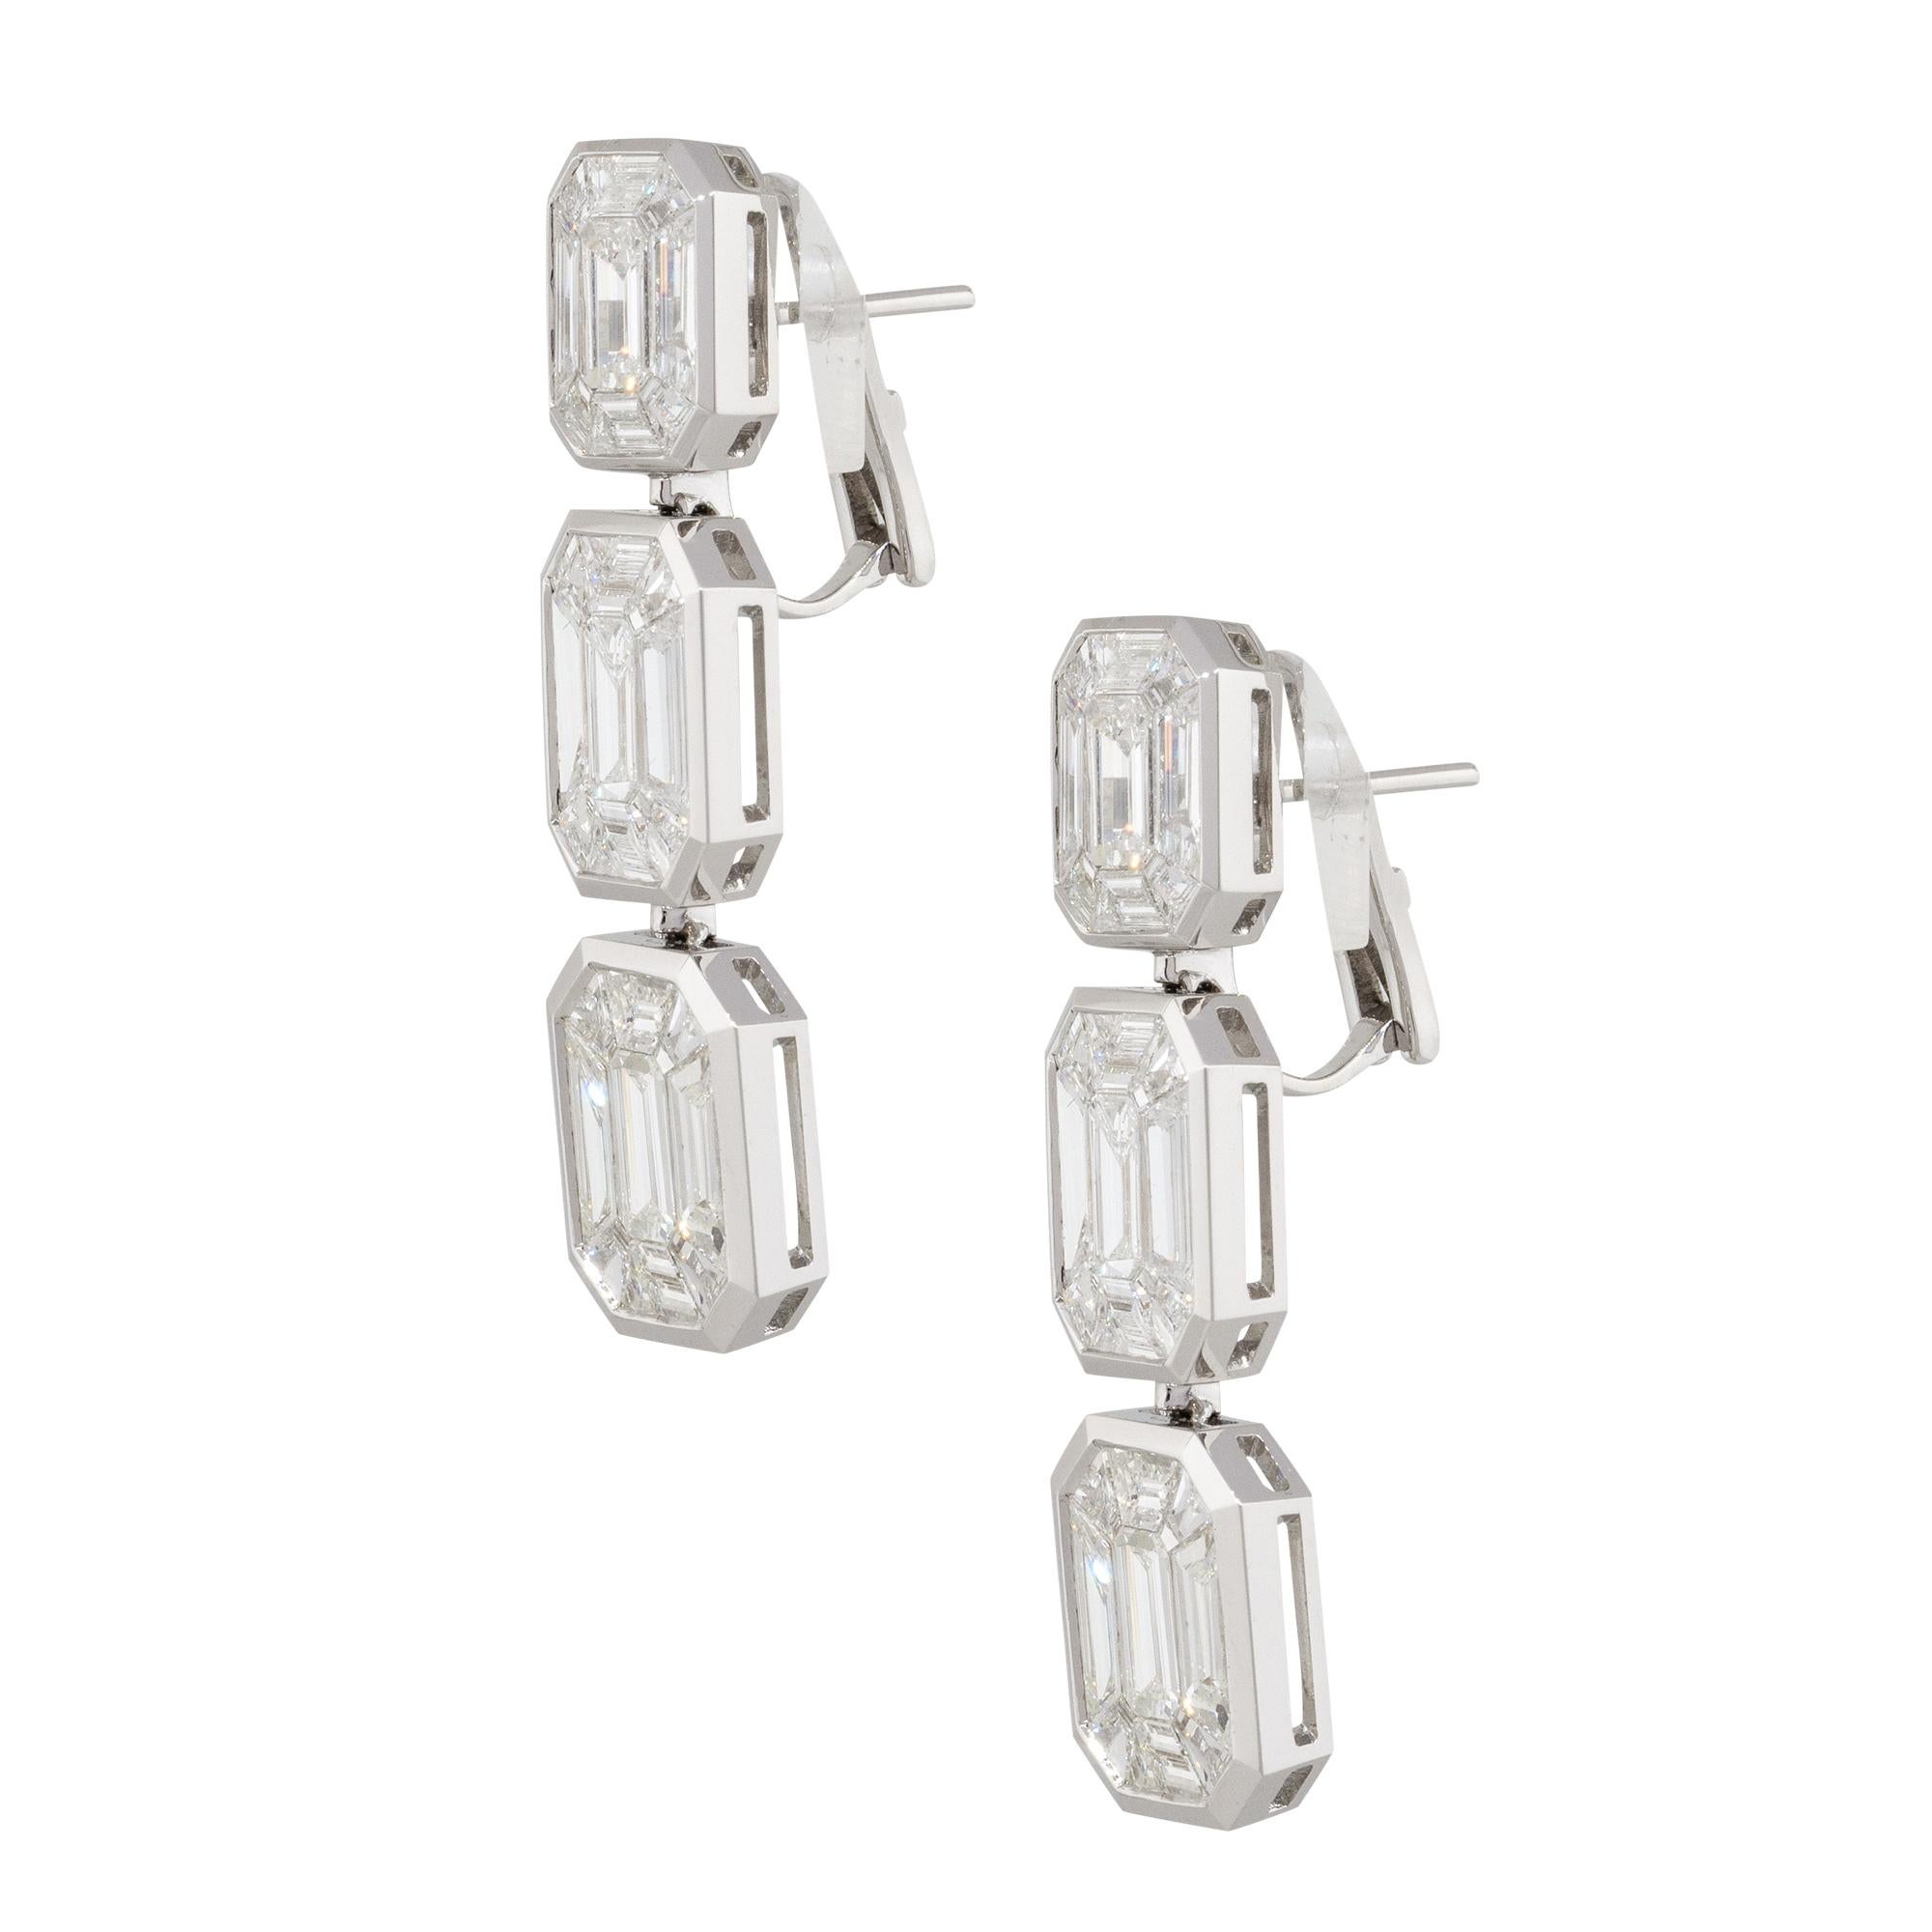 Material: 18k White Gold
Diamond Details: Approximately 10.08ctw of emerald cut Diamonds. Diamonds are G/H in color and VS in clarity
Clasps: Omega clasps
Total Weight: 11.6g (7.5dwt) 
Measurements: 0.45